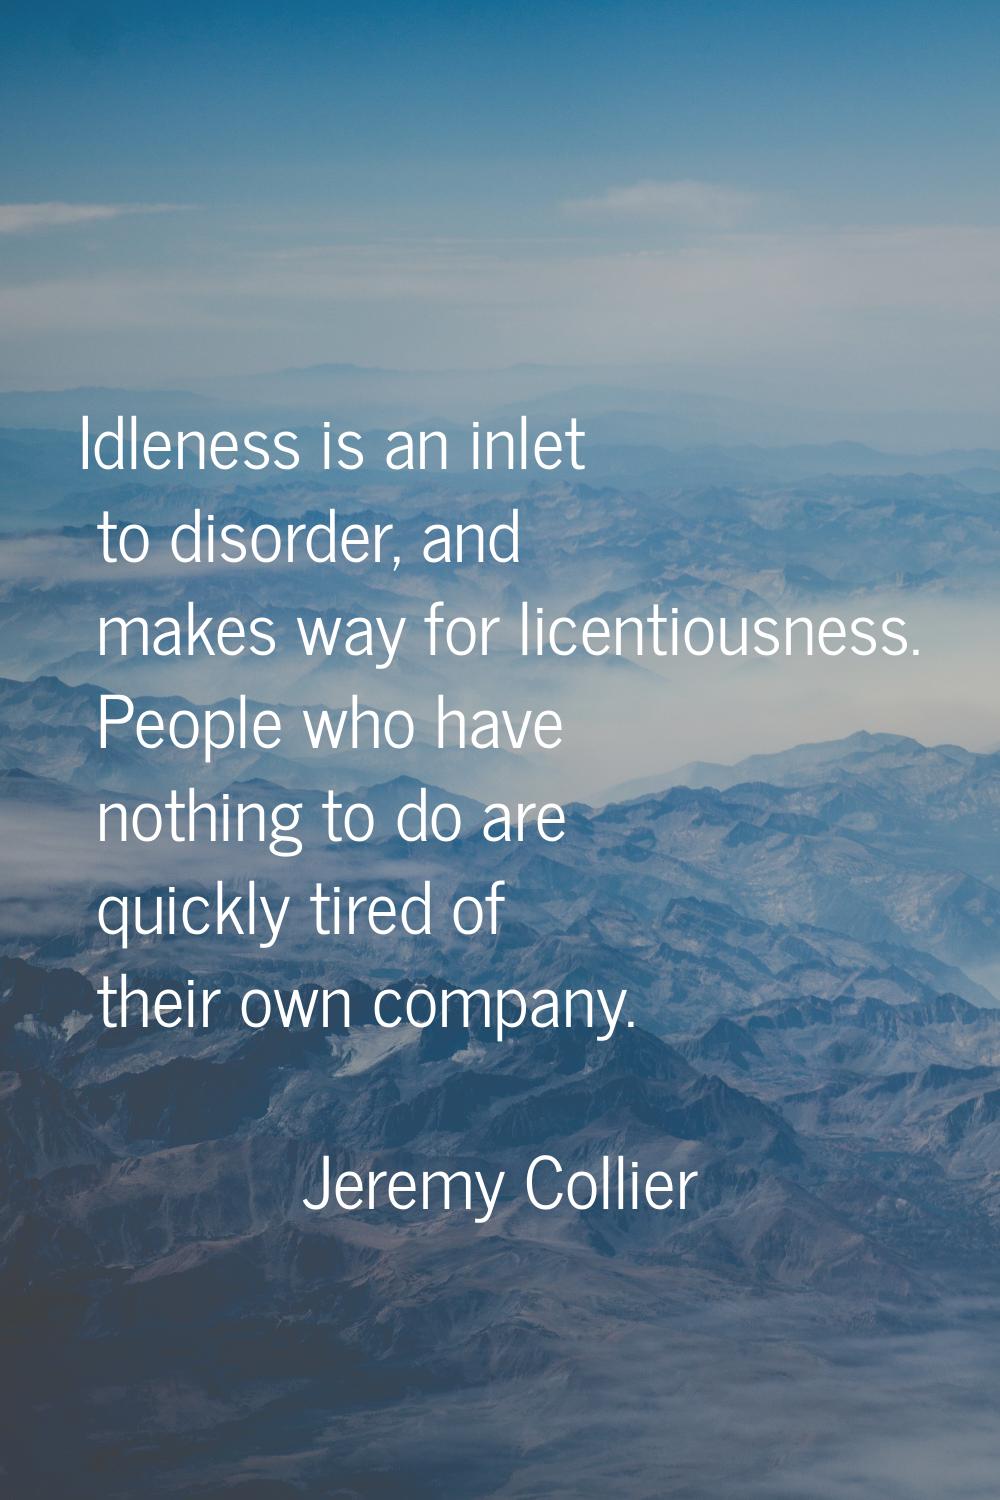 Idleness is an inlet to disorder, and makes way for licentiousness. People who have nothing to do a